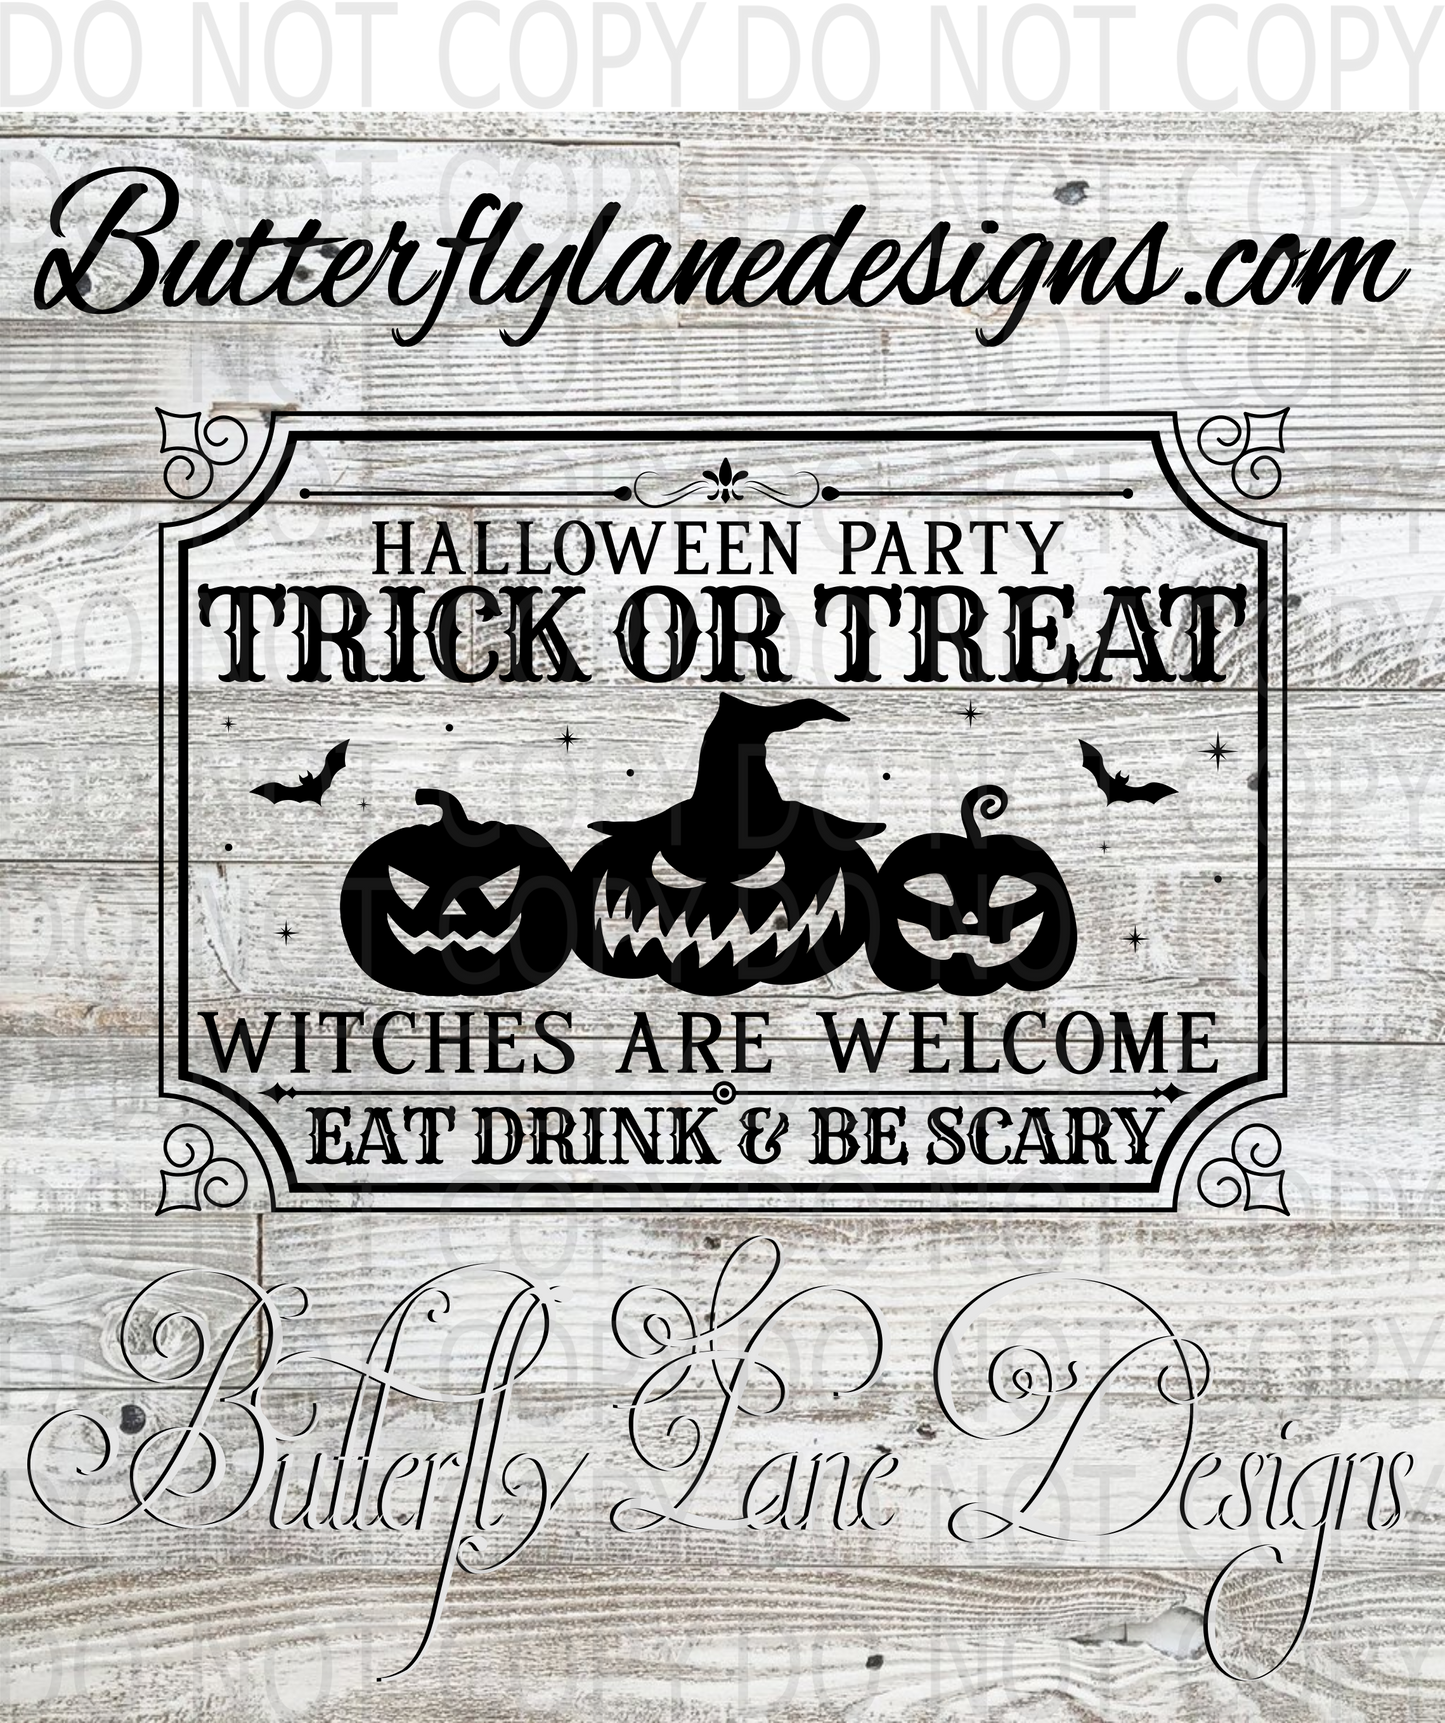 Halloween Party-witches welcome-Clear Decal :: VC Decal